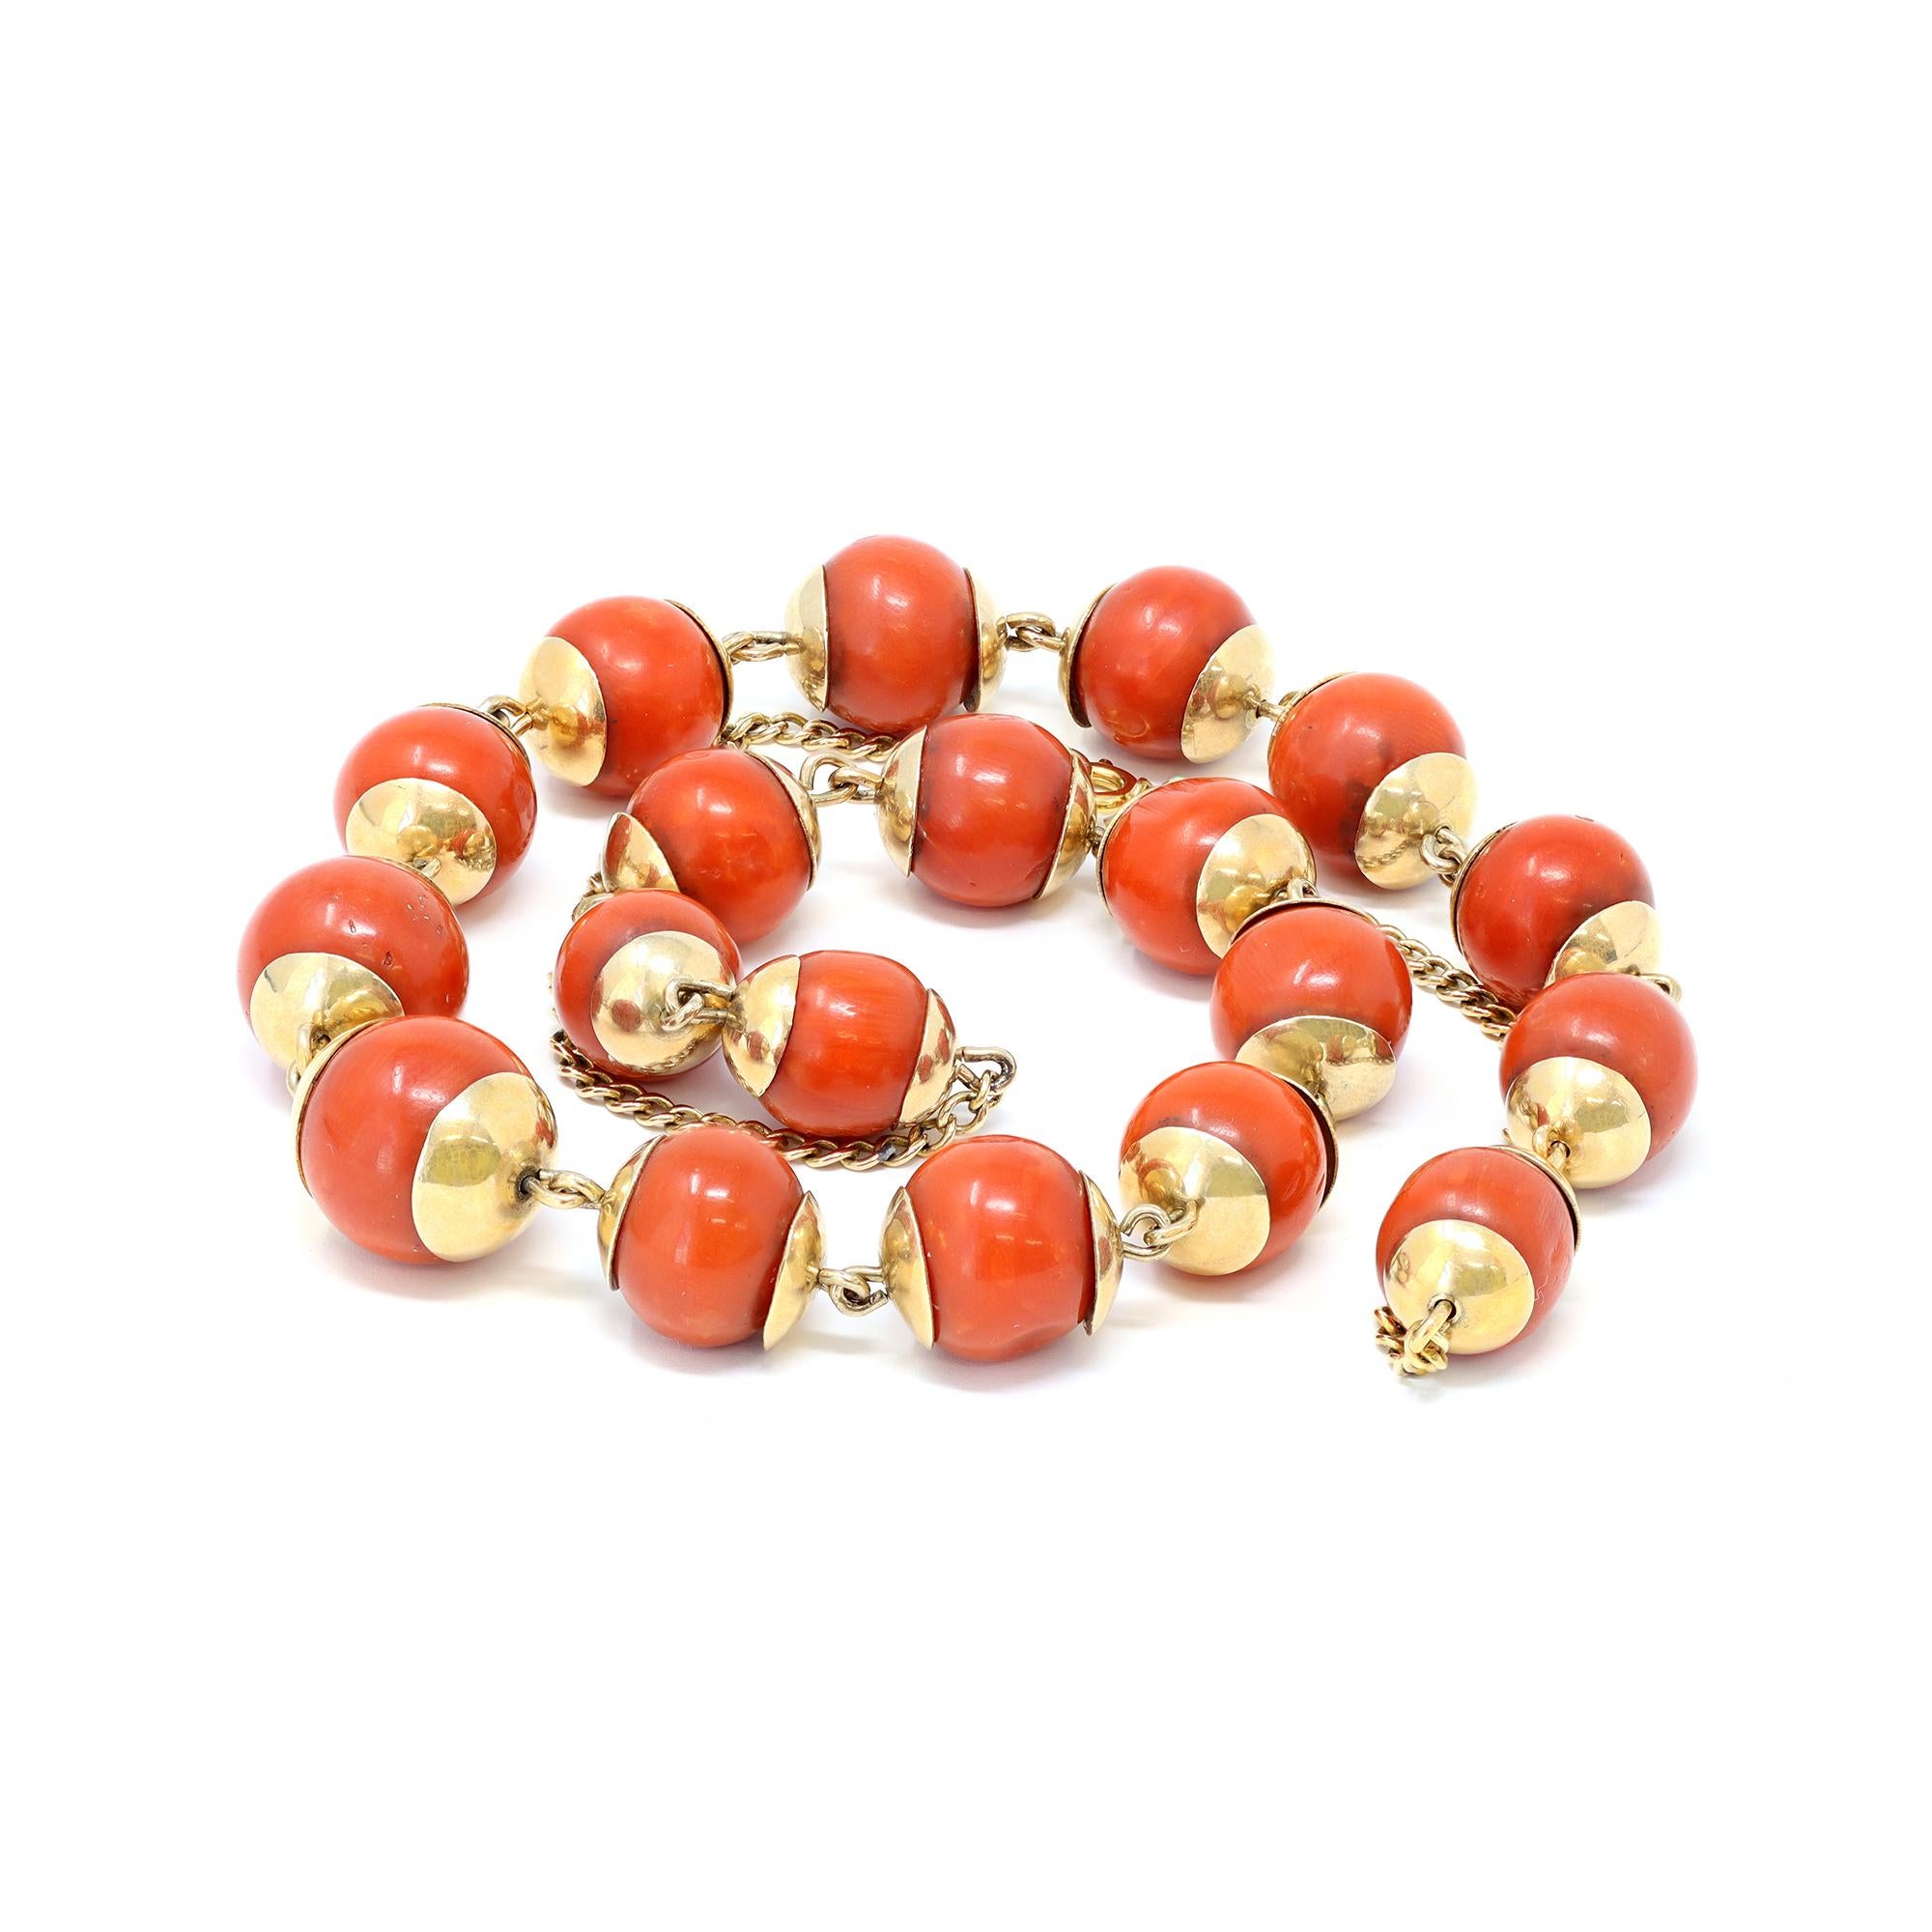 A classic antique coral bead station necklace circa 1900. The coral beads haver a deep red hue, near round shape, measuring 10-12 millimeter. The coral is natural untreated with no indication of dye. The gross weight is 17.5 grams. It measures 19”